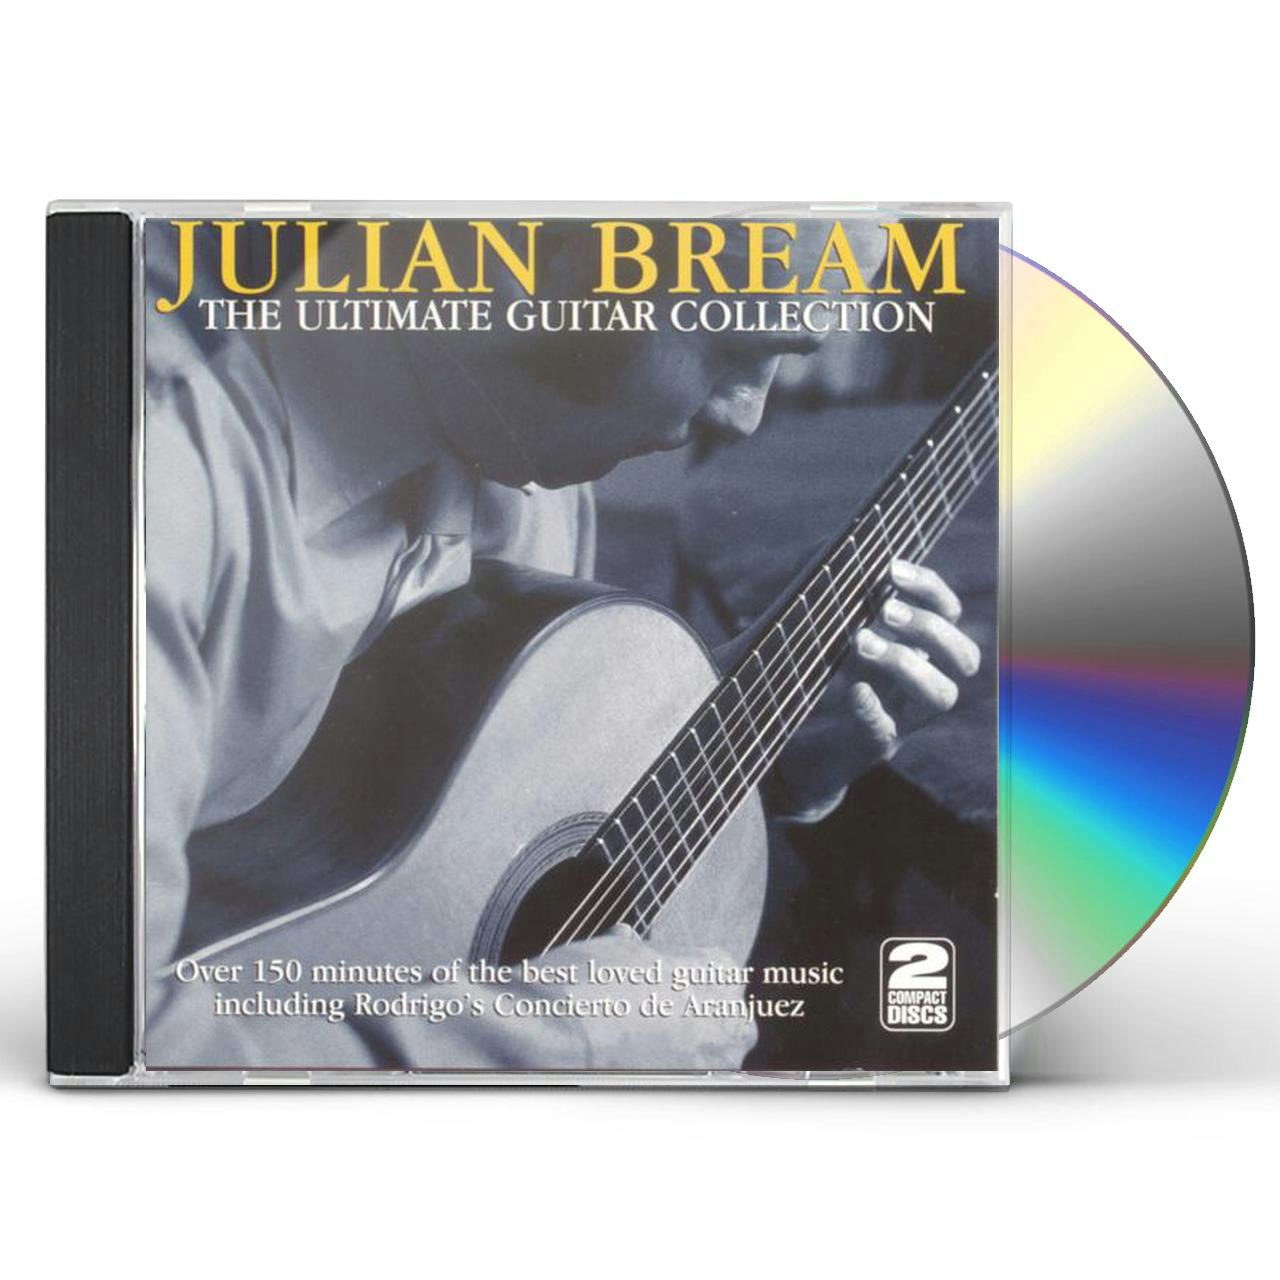 Julian Bream ULTIMATE GUITAR COLLECTION CD